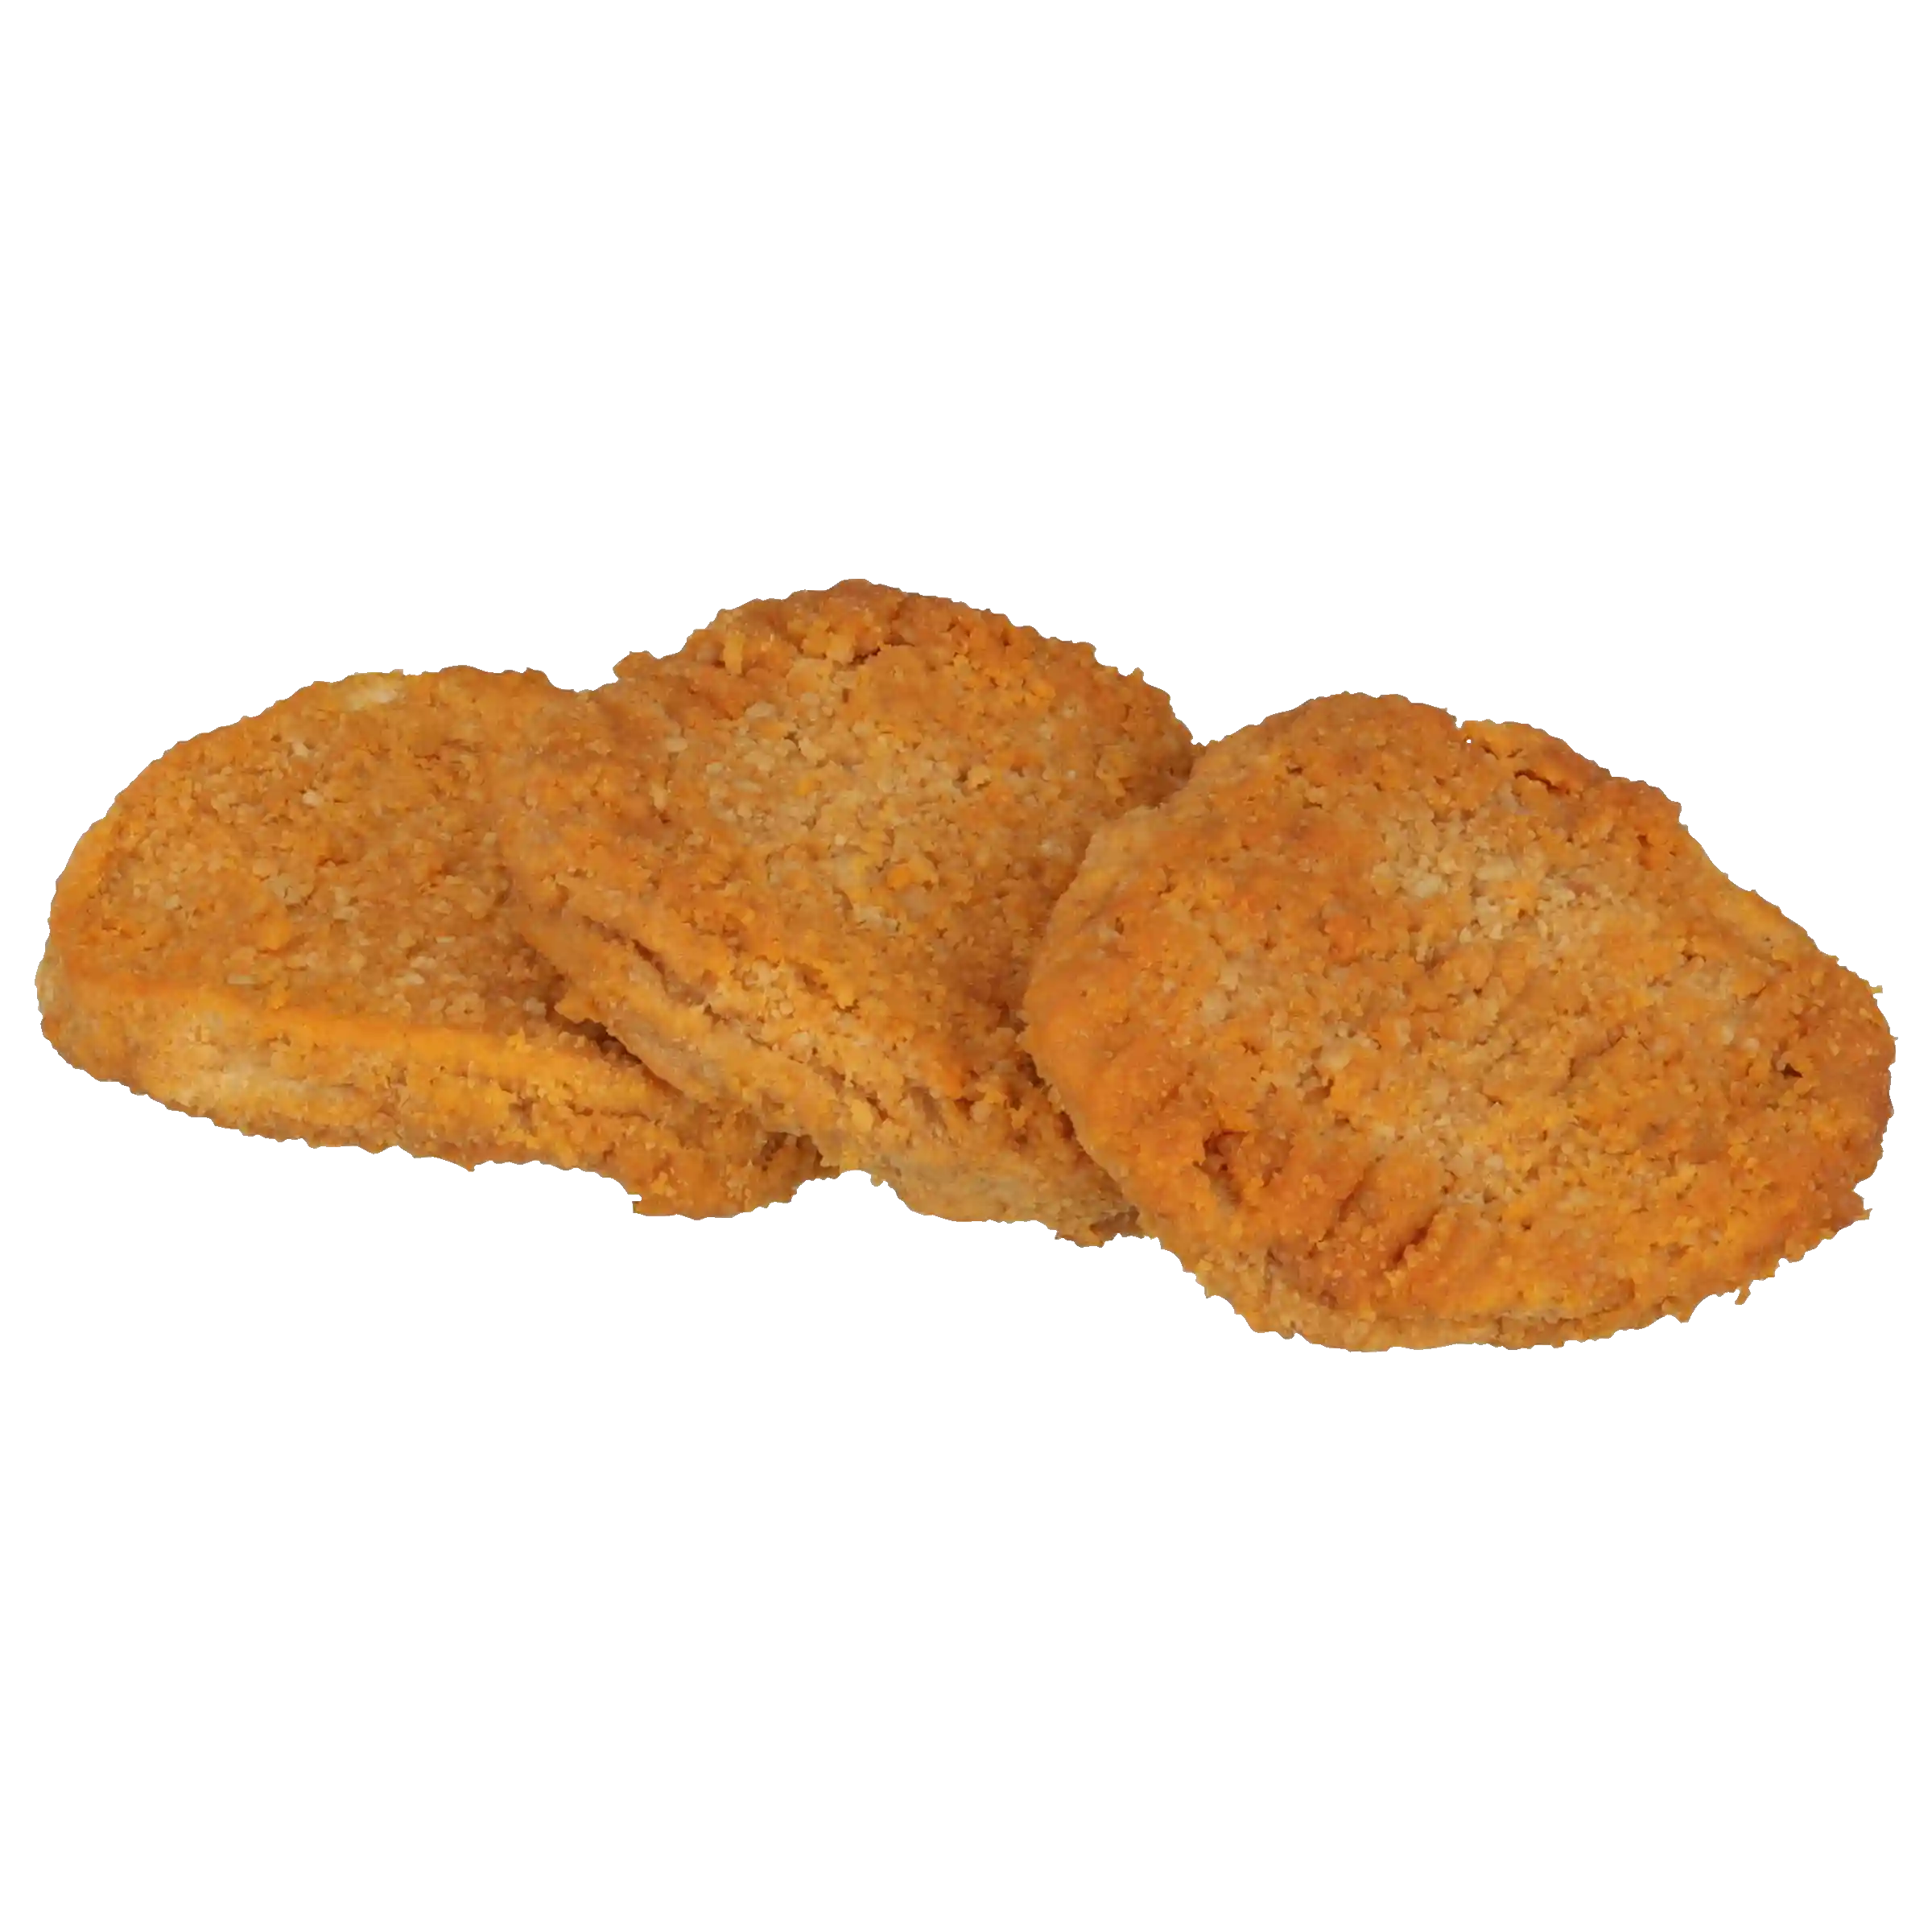 Tyson® Fully Cooked Whole Grain Breaded Hot & Spicy Chicken Patties, CN, 3.26 oz. _image_11